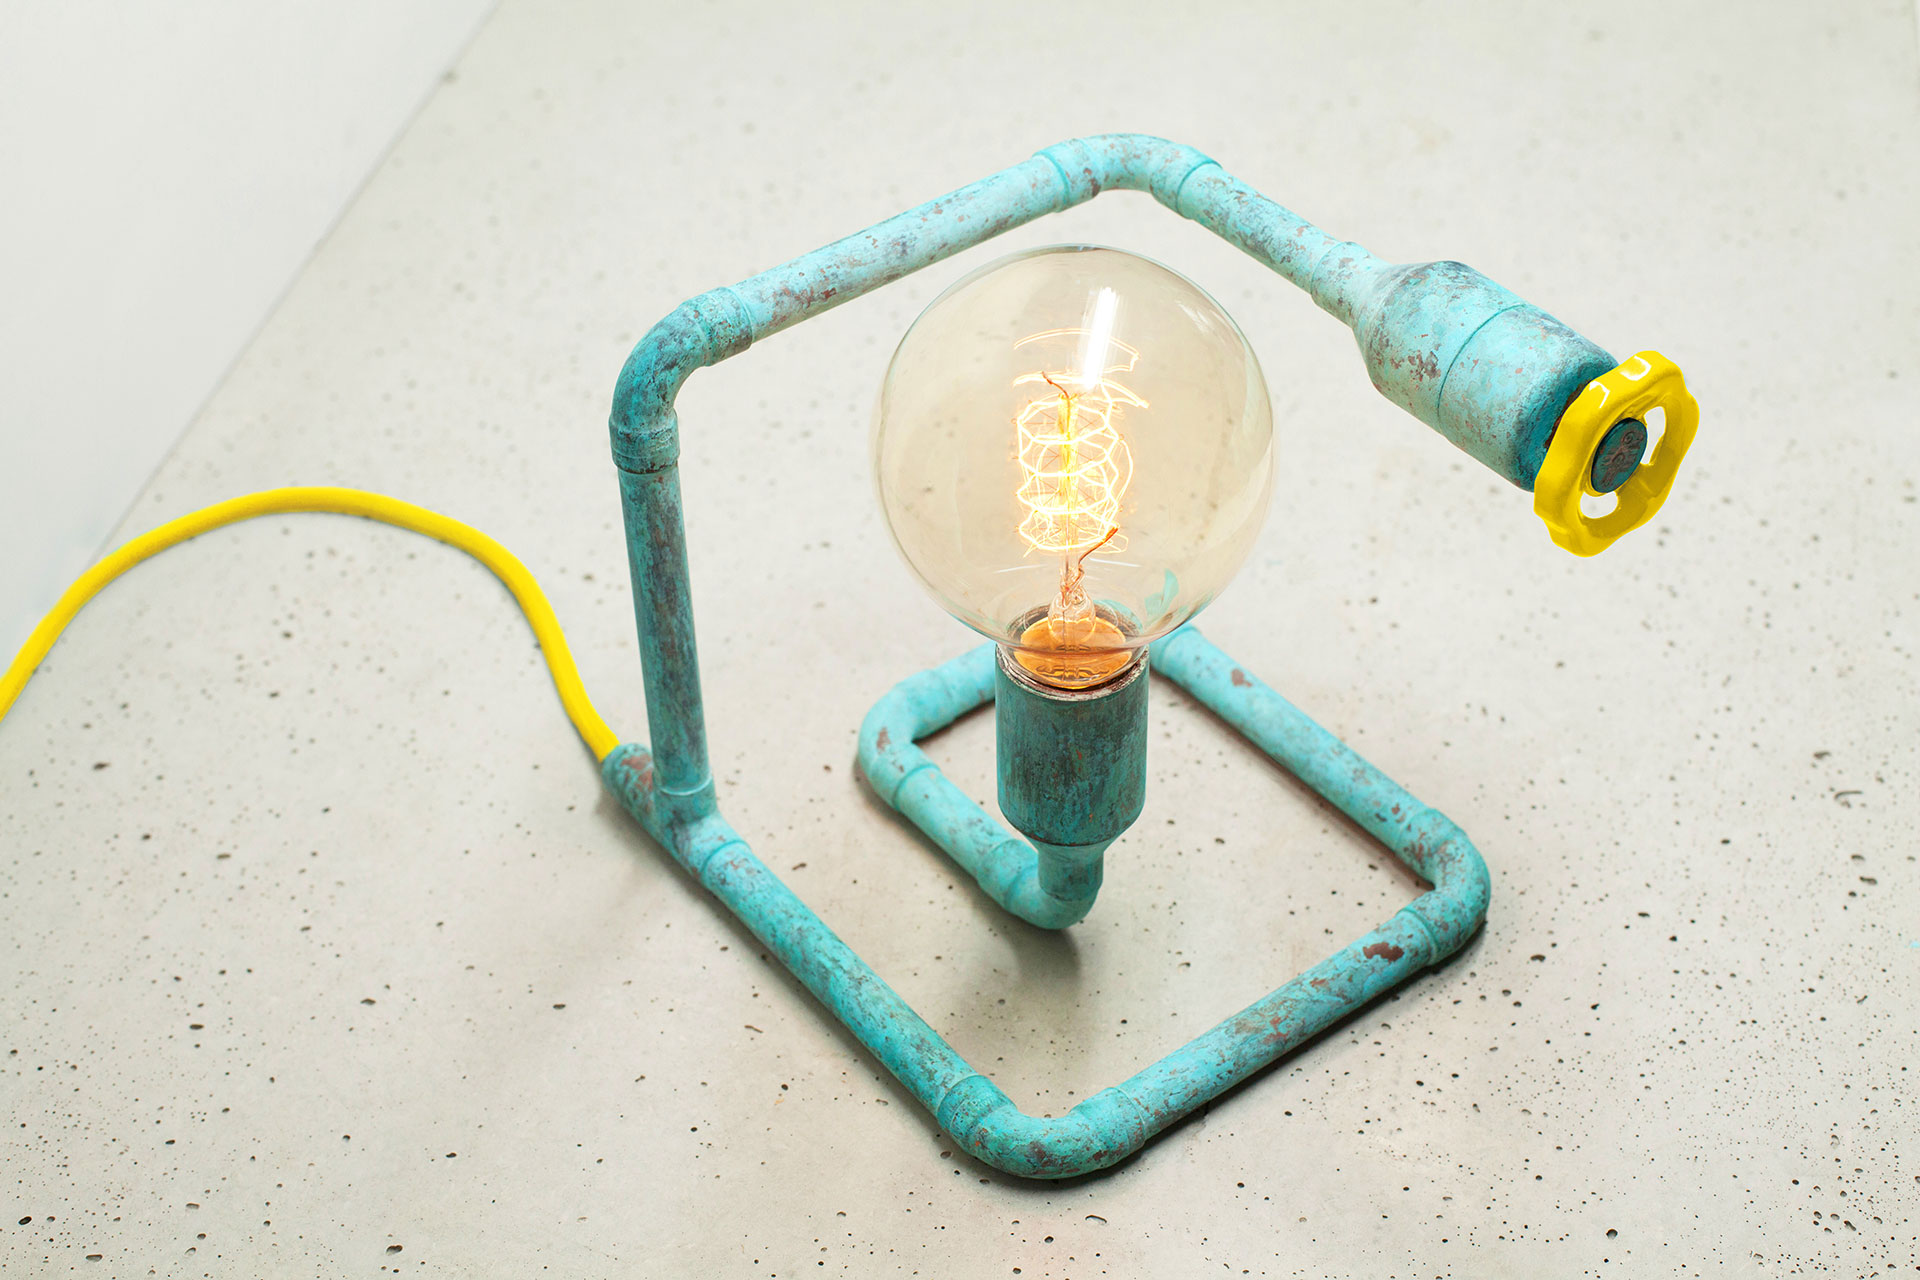 Colorful table lamp in trendy turquoise patina with yellow knob dimmer and yellow braided cord